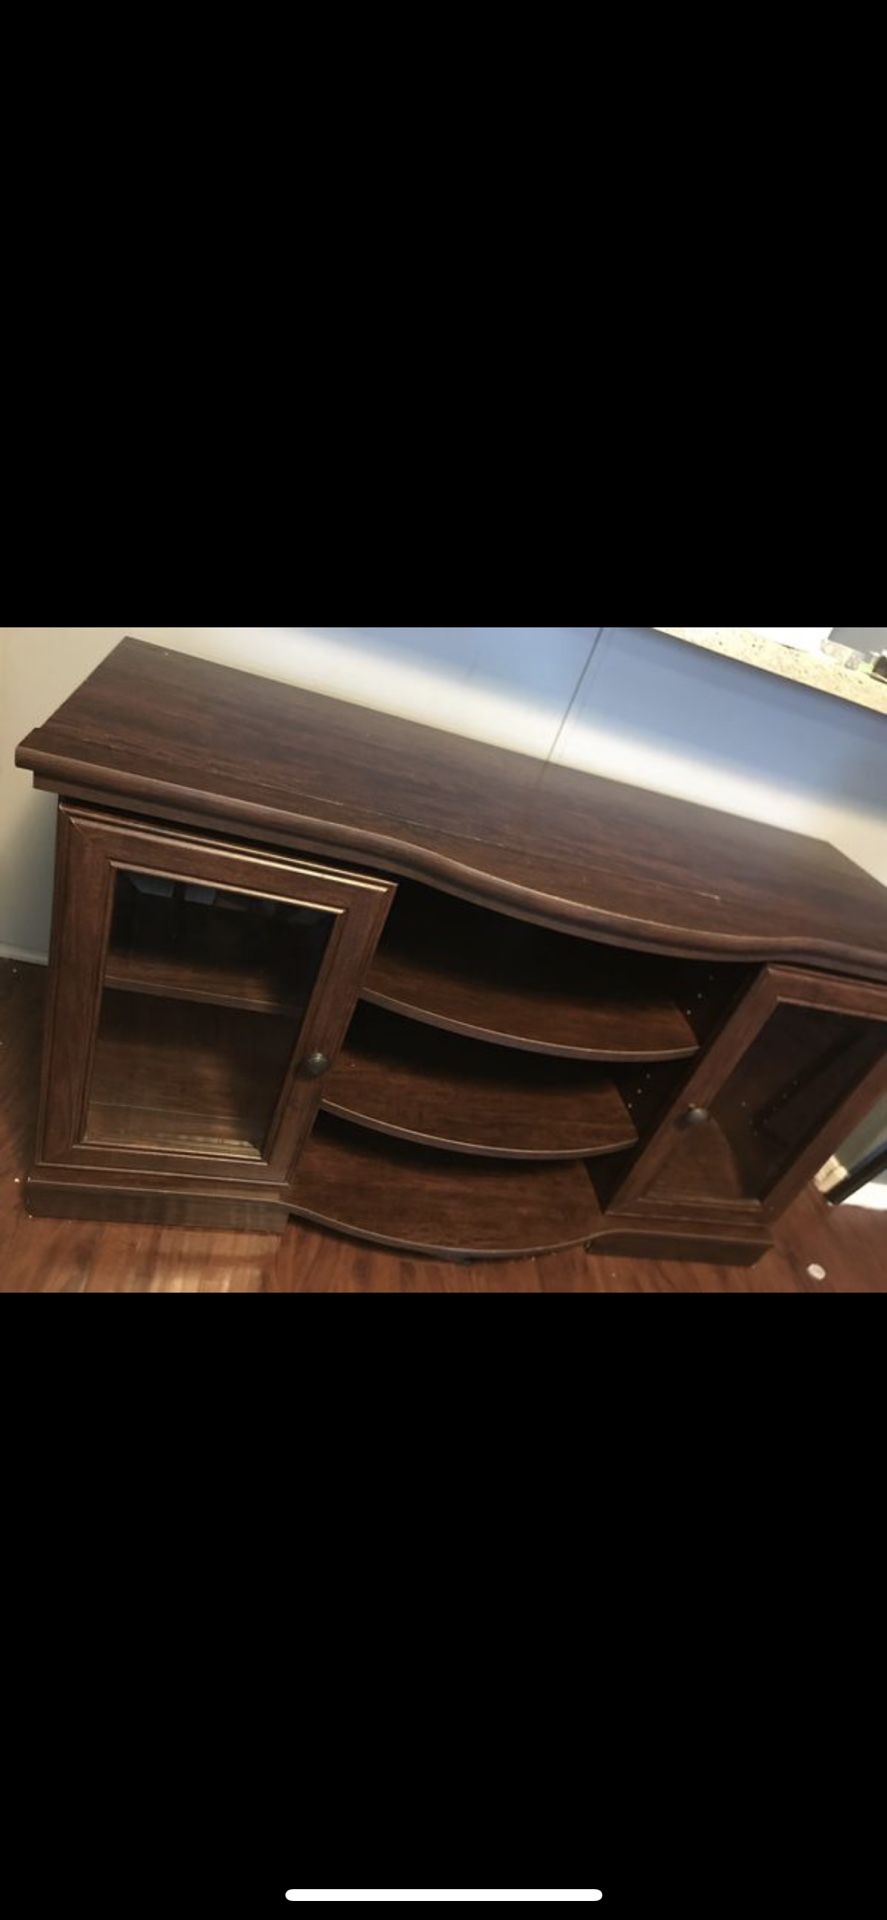 Tv stand television console entertainment media center with shelf and cabinet doors